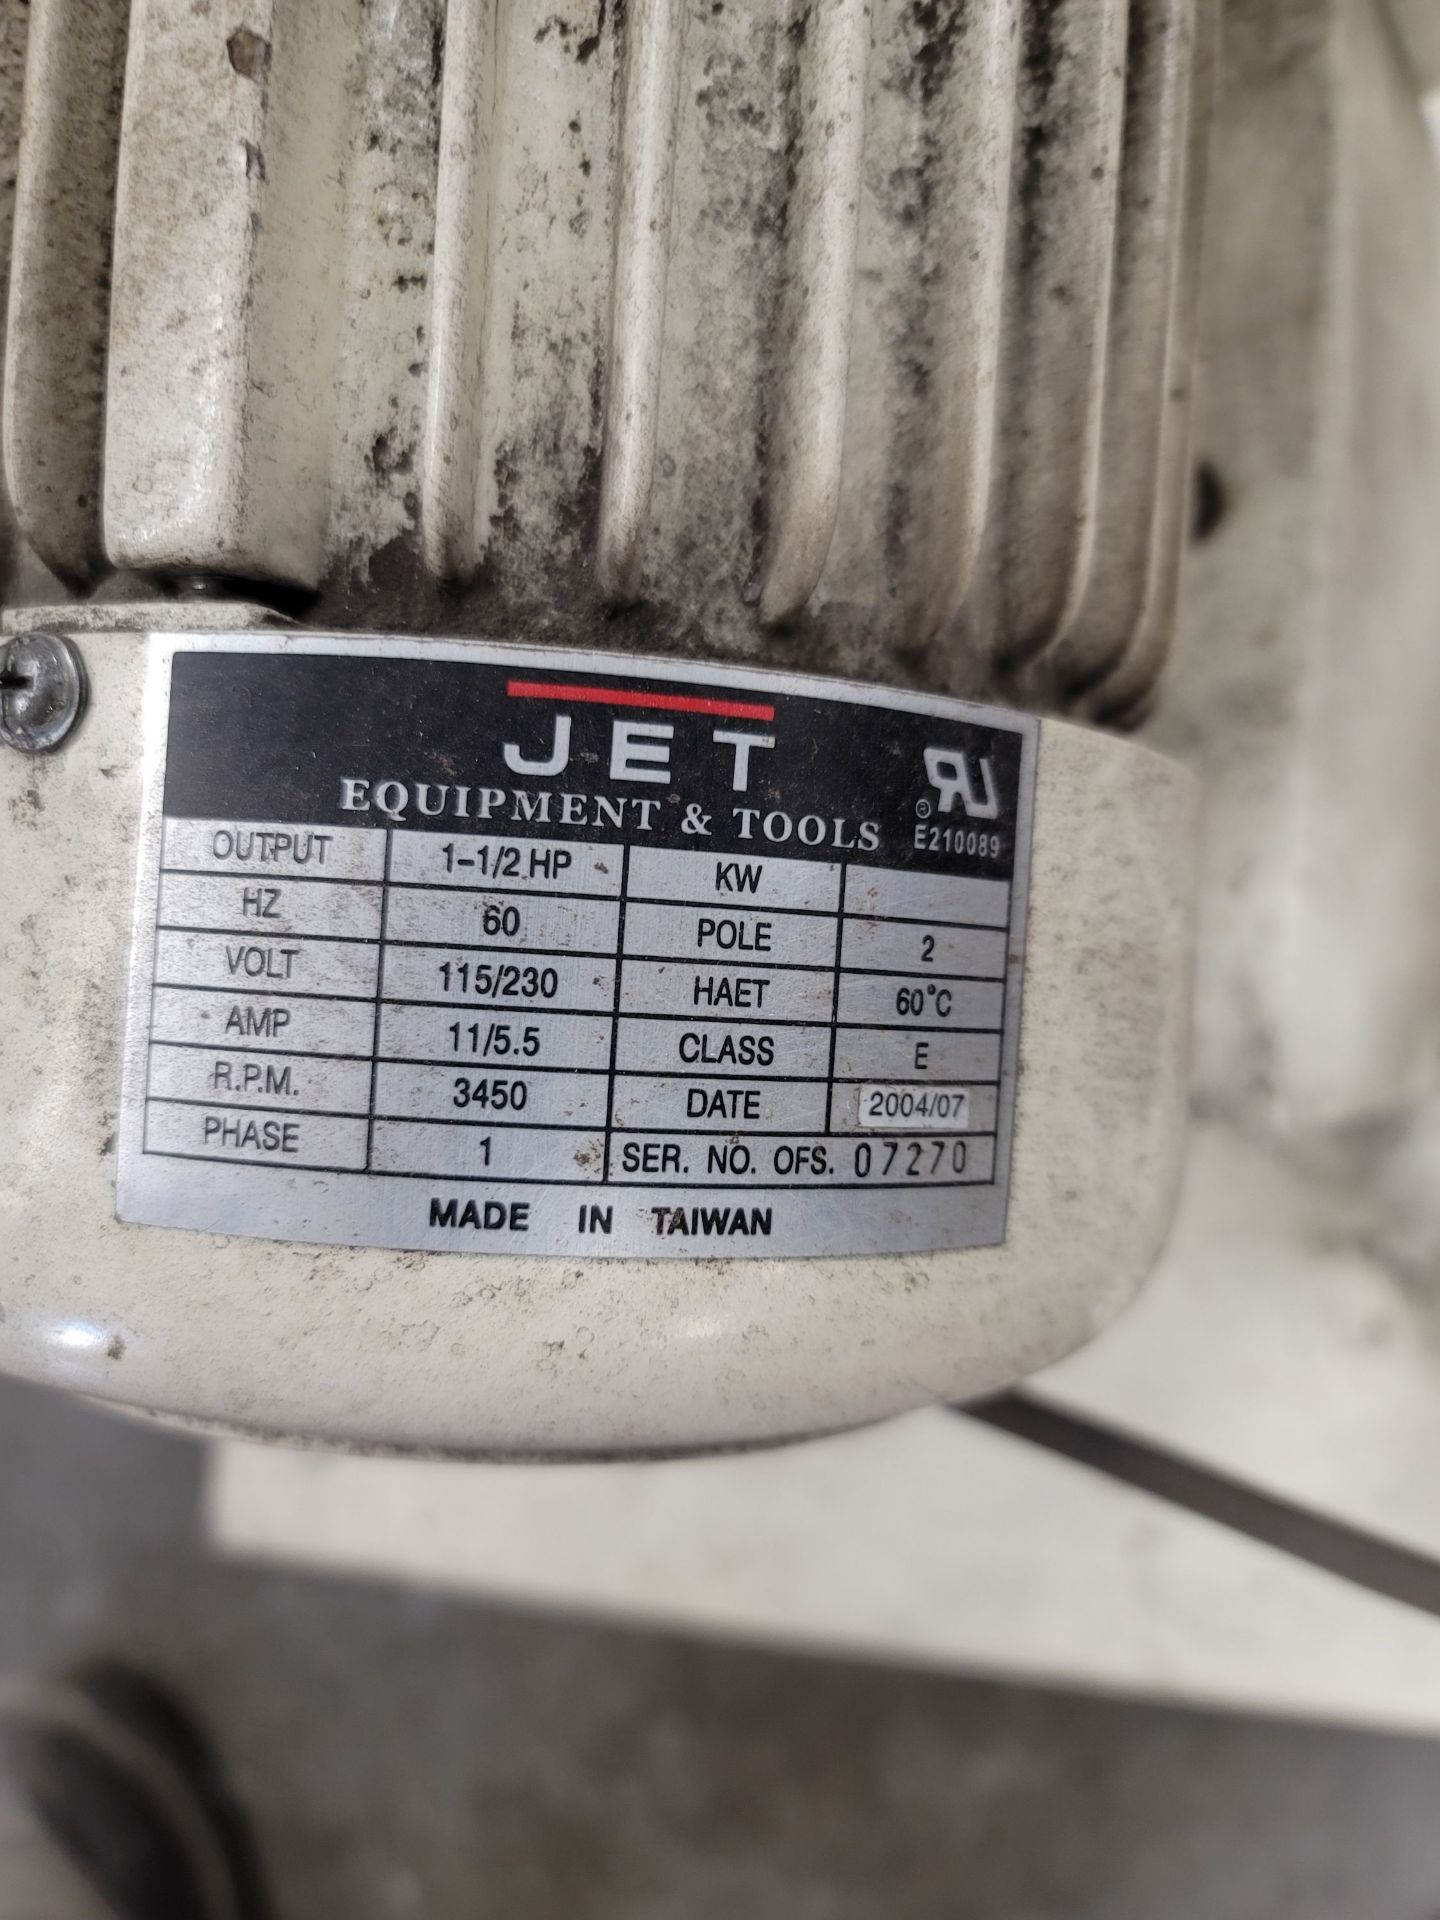 JET 1100 CFM DUST COLLECTOR, MODEL DC-1100A, 1-1/2 HP, SINGLE PHASE, S/N 40713873, MISSING THE - Image 3 of 4